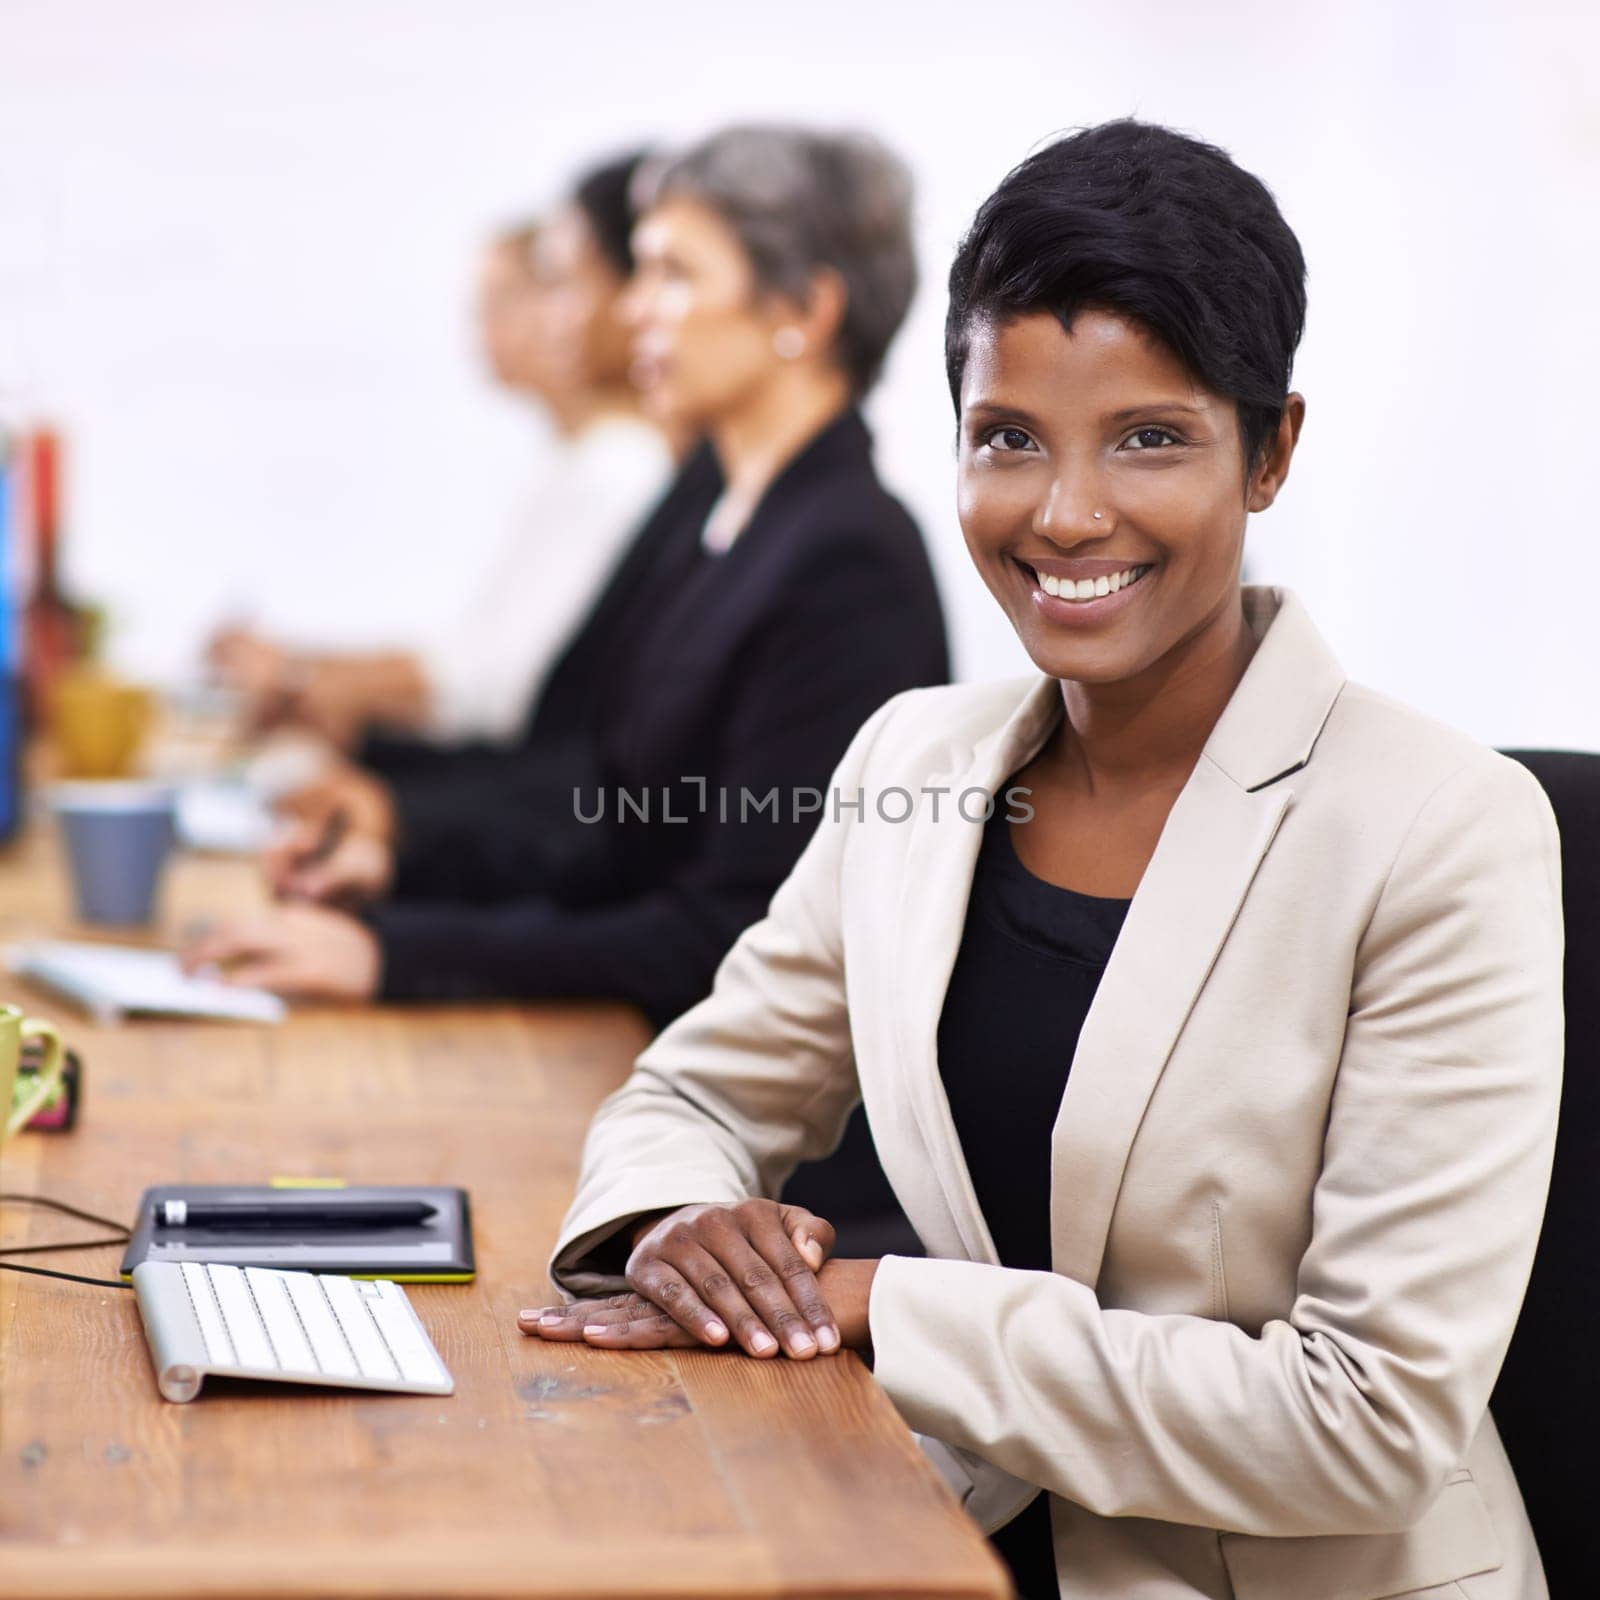 Happy woman, portrait and professional with confidence at office for business, design or creative startup. Face of female person, agent or employee with smile, career ambition or agency at workplace by YuriArcurs